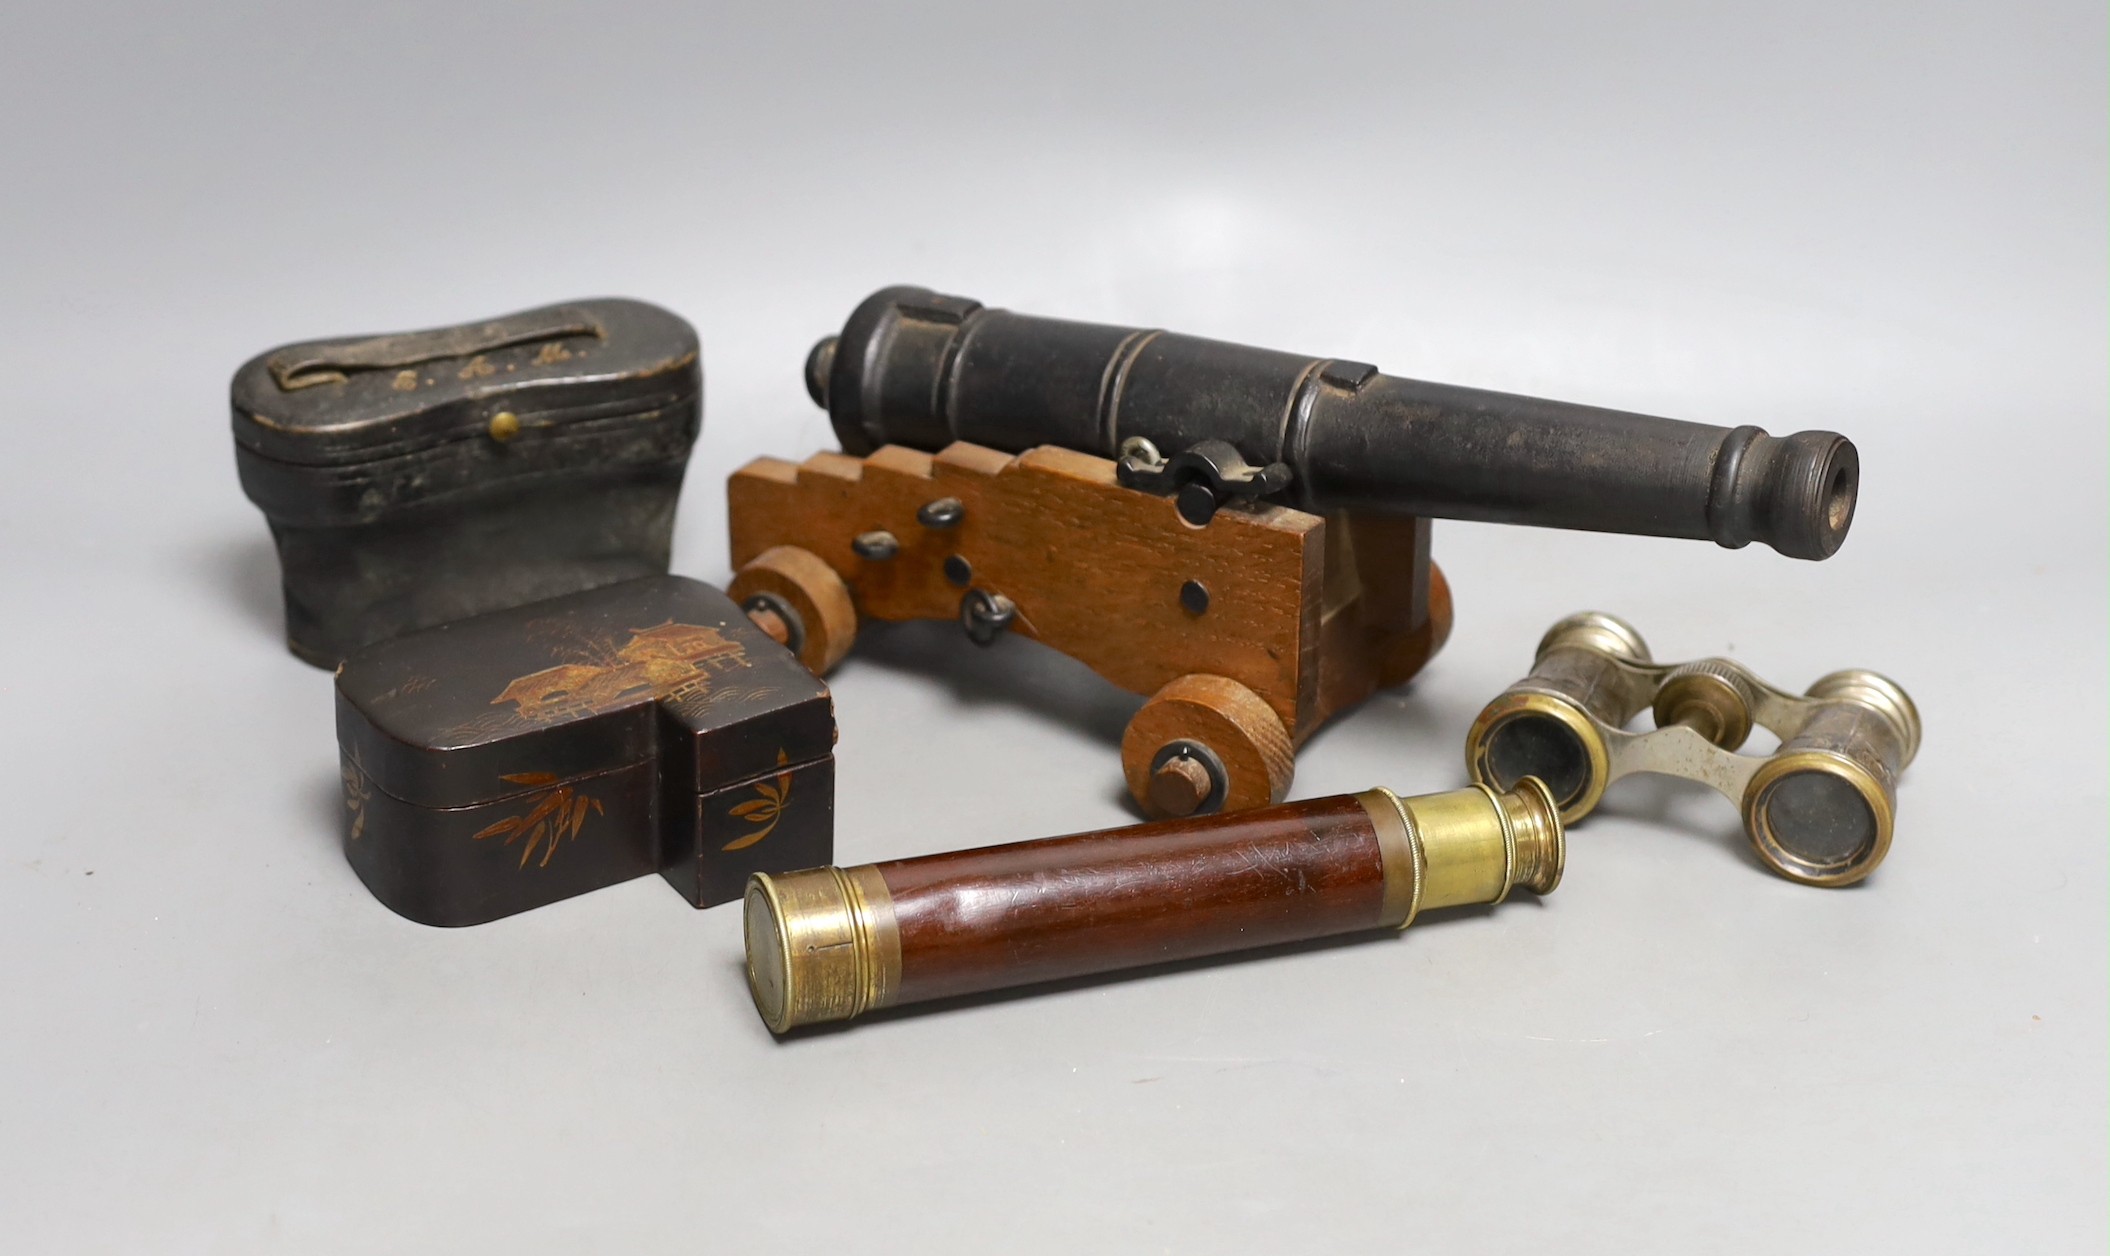 A model cast iron cannon on oak carriage, 26 cm long, two pairs of opera glasses, a telescope and lacquer box